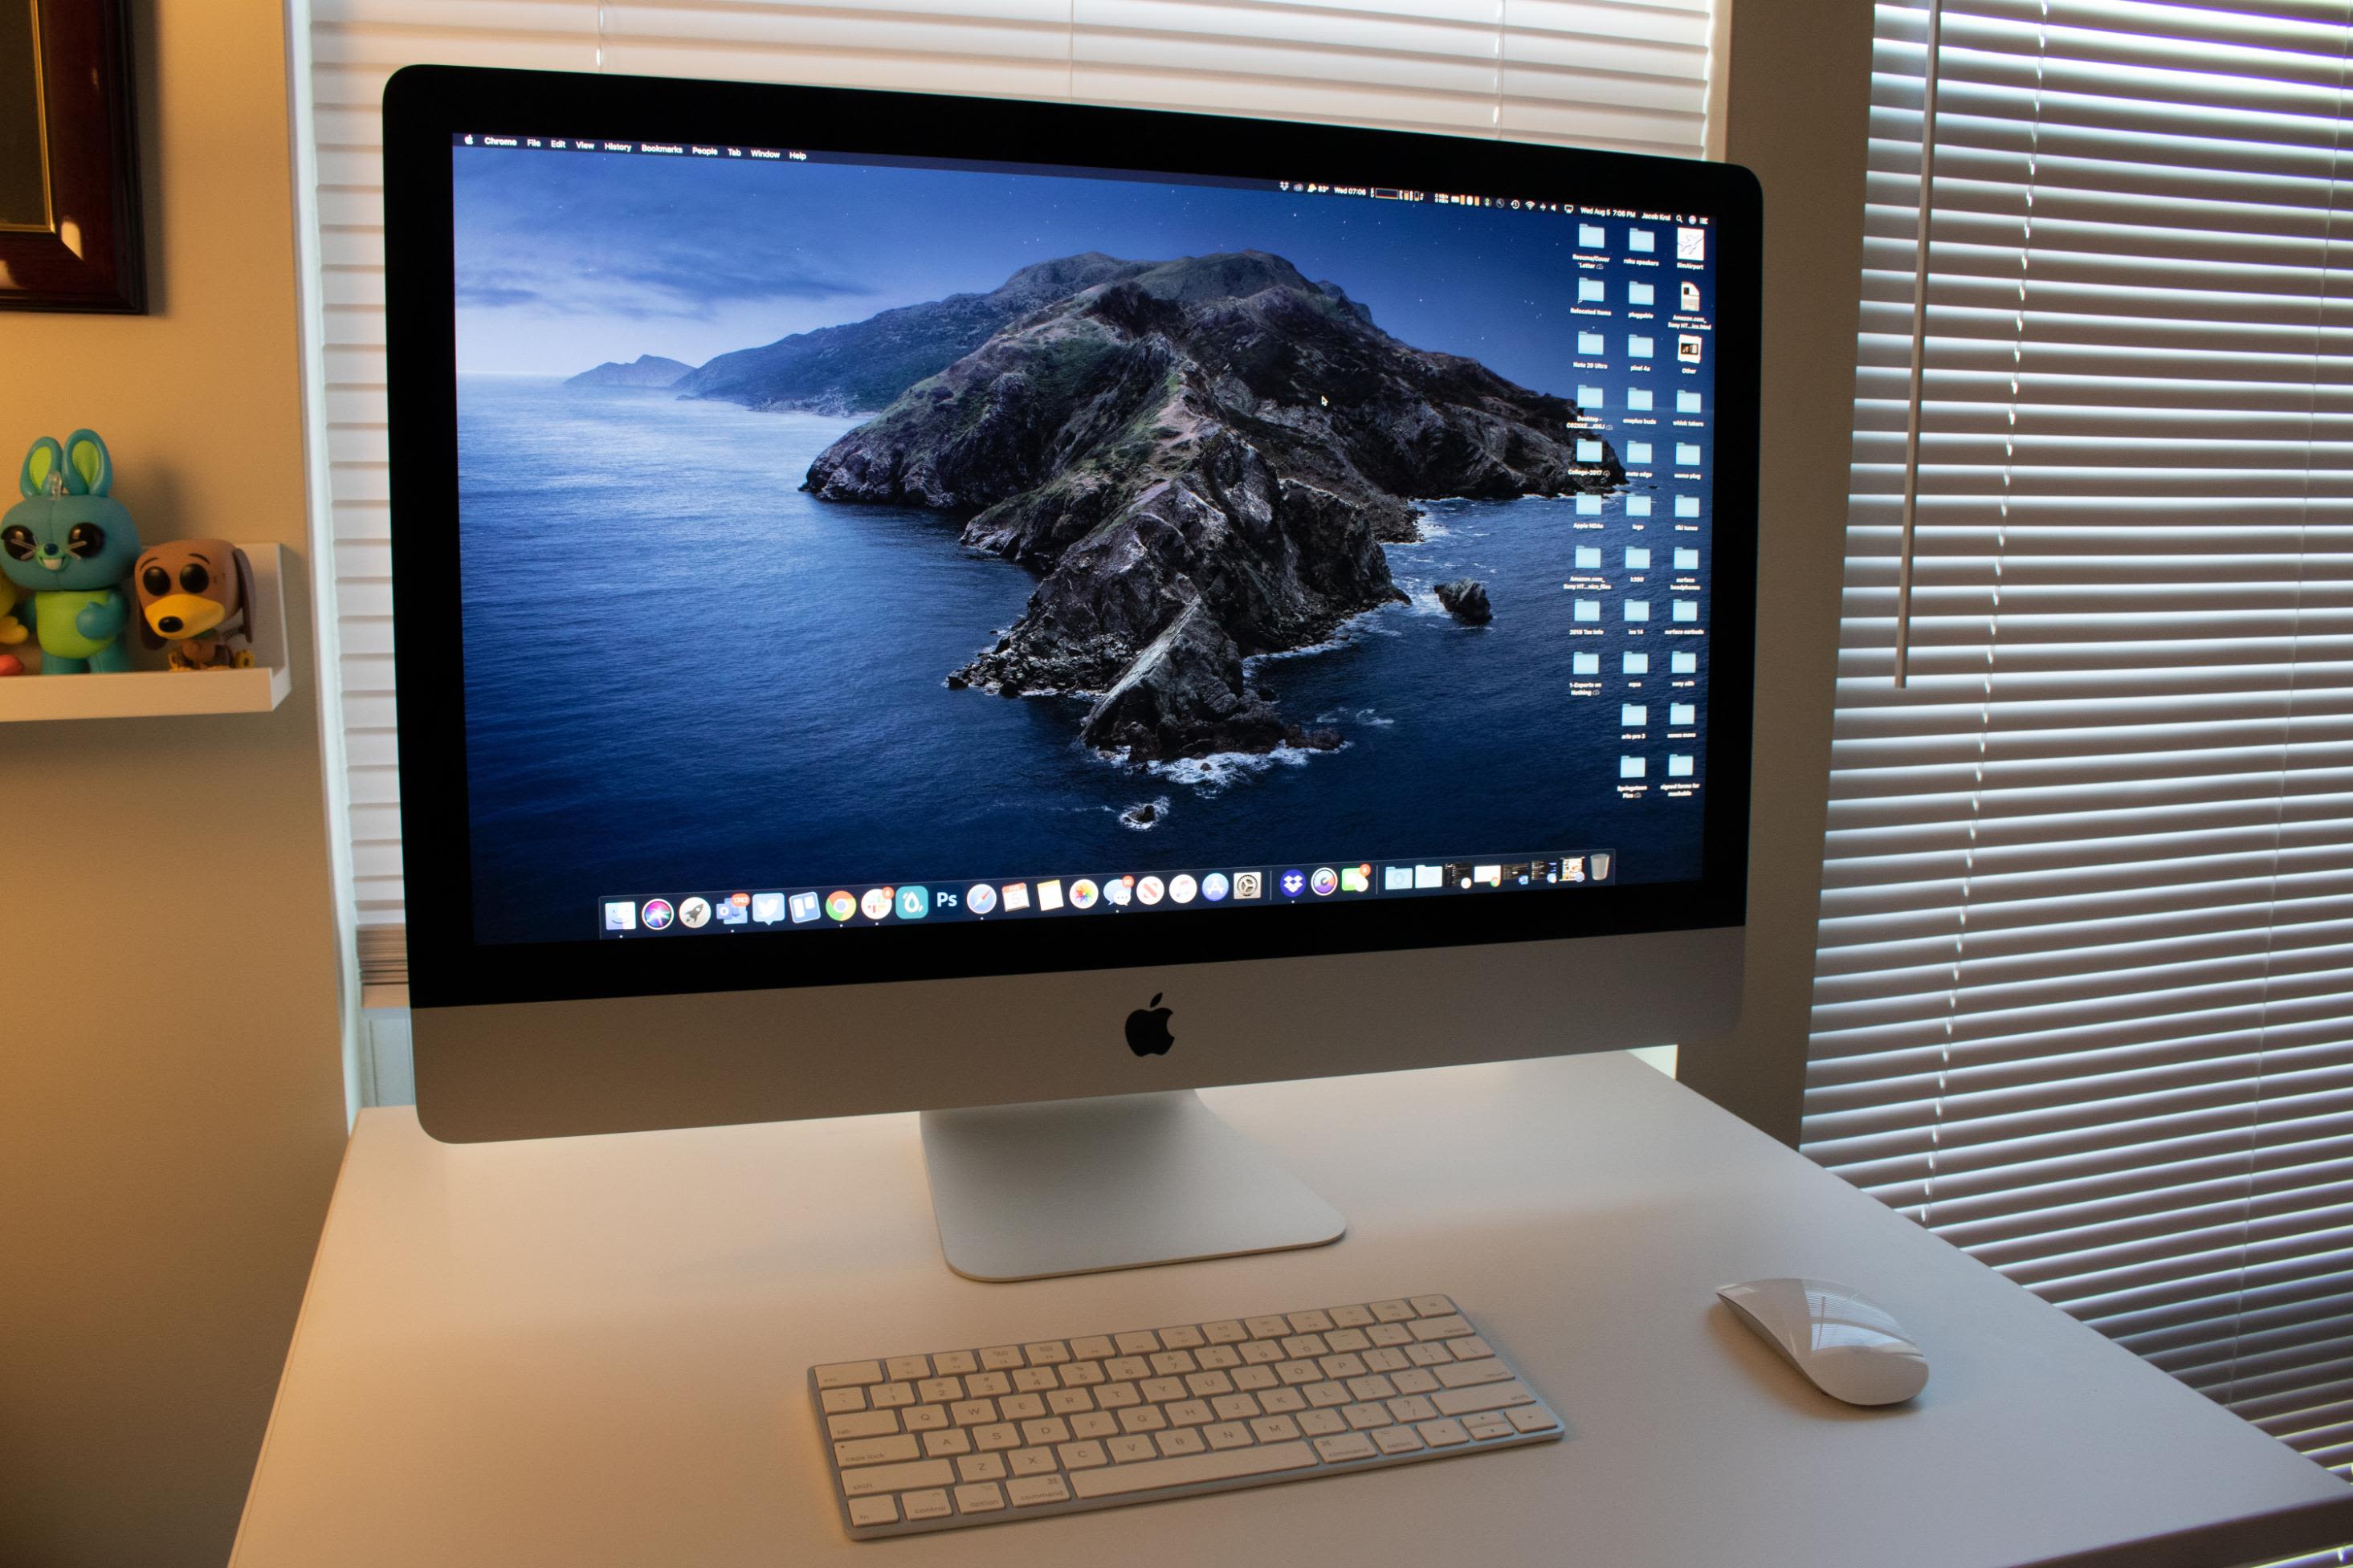 commentator bar Tot ziens How the 2021 iMac compares to similar all-in-one PCs | CNN Underscored